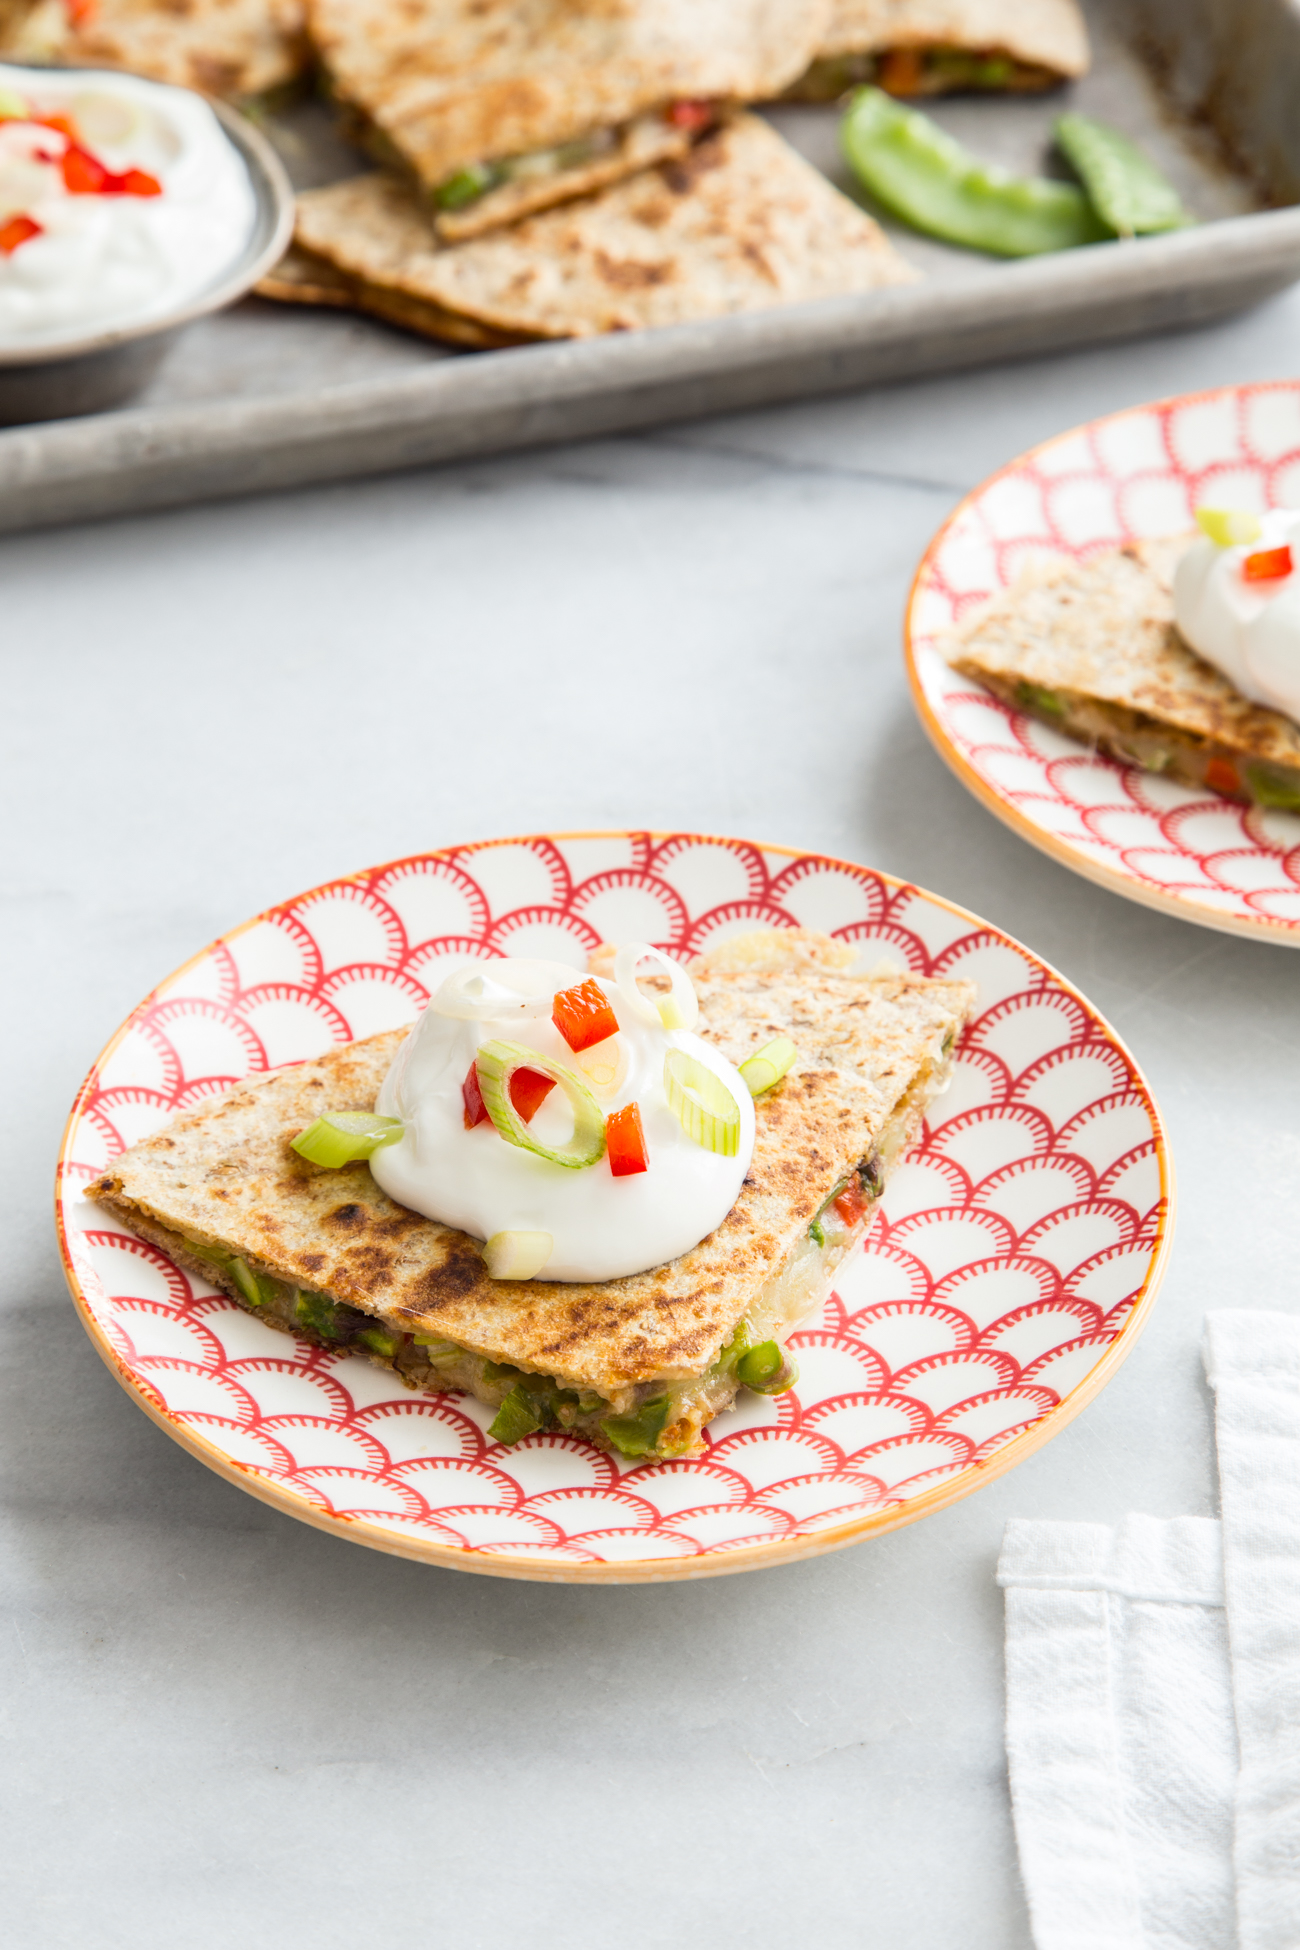 A Meatless Monday Crowd-Pleaser: Spring Vegetable Quesadillas